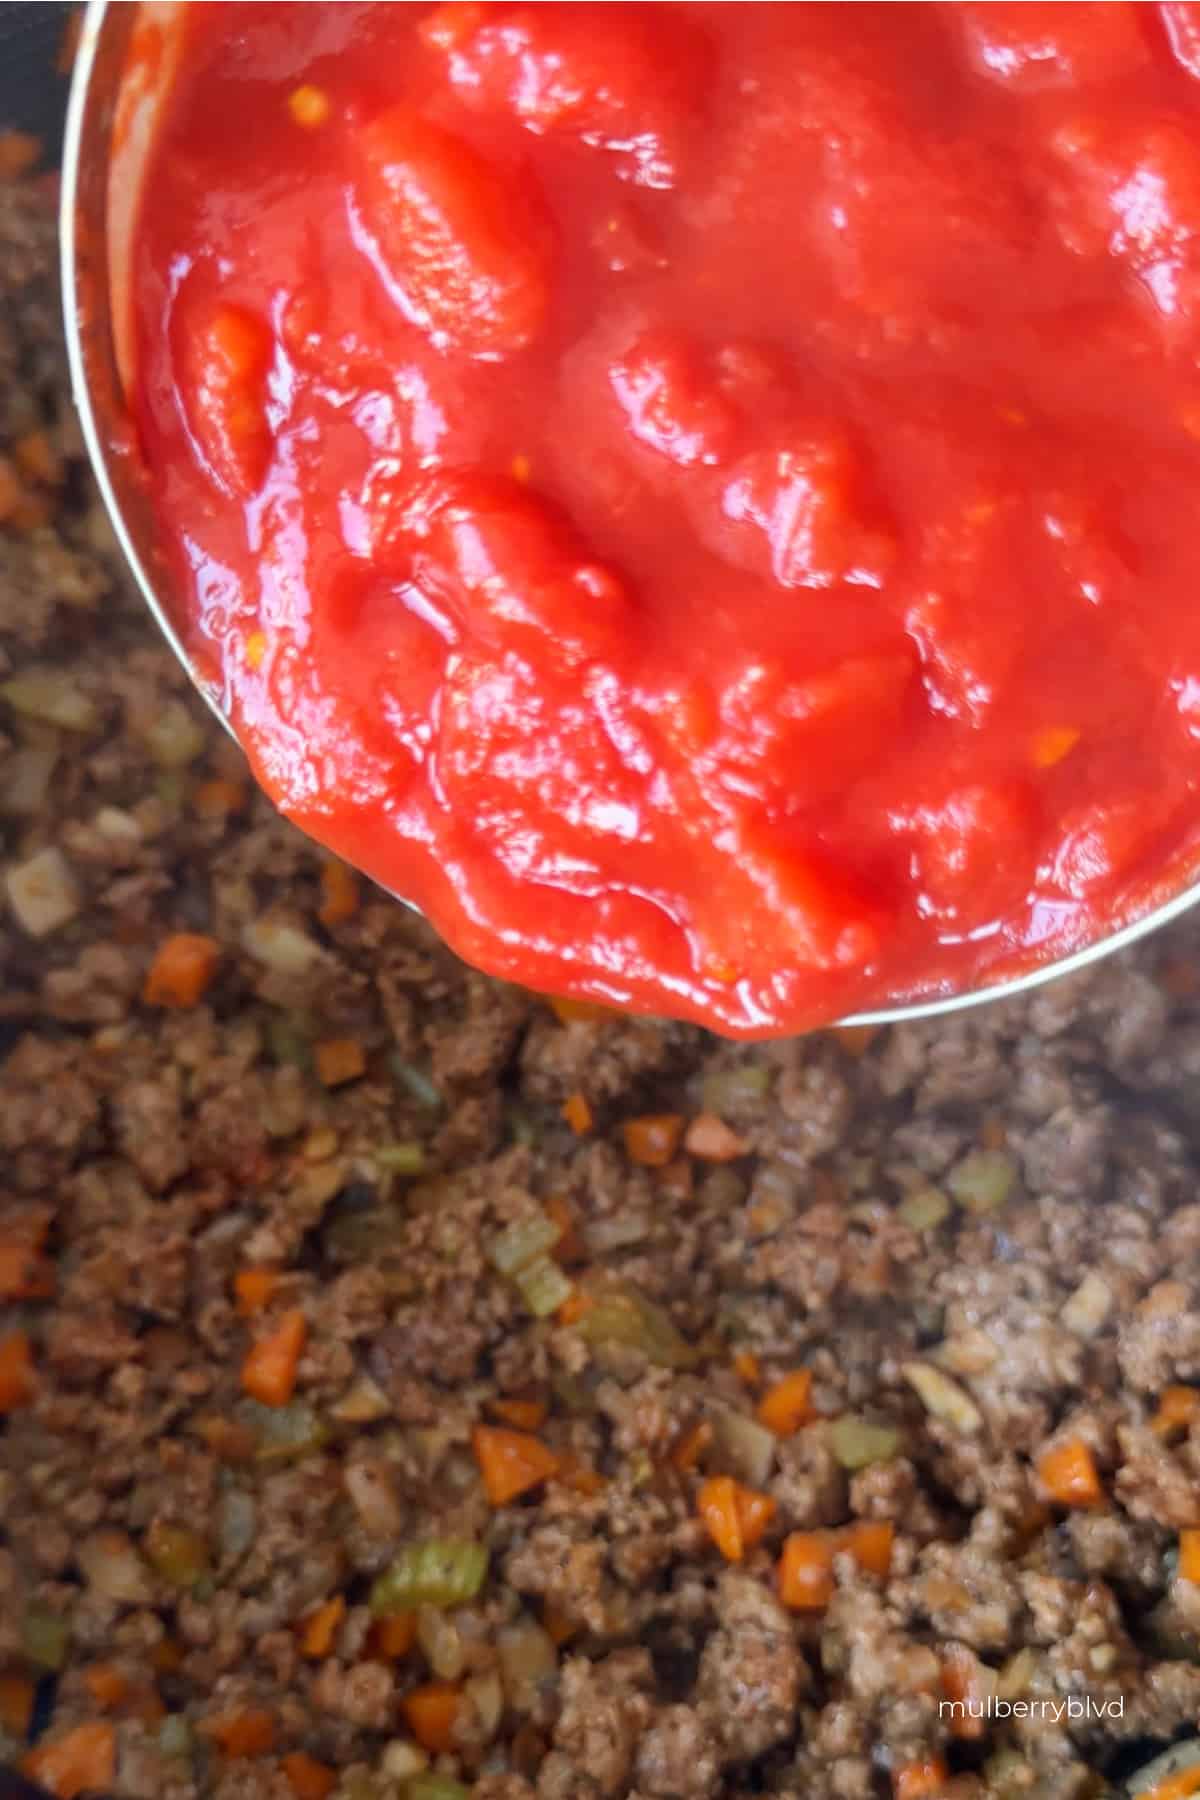 an image of a can of tomatoes being added to a mixture of cooked beef and finely chopped carrots, celery, mushrooms and onions